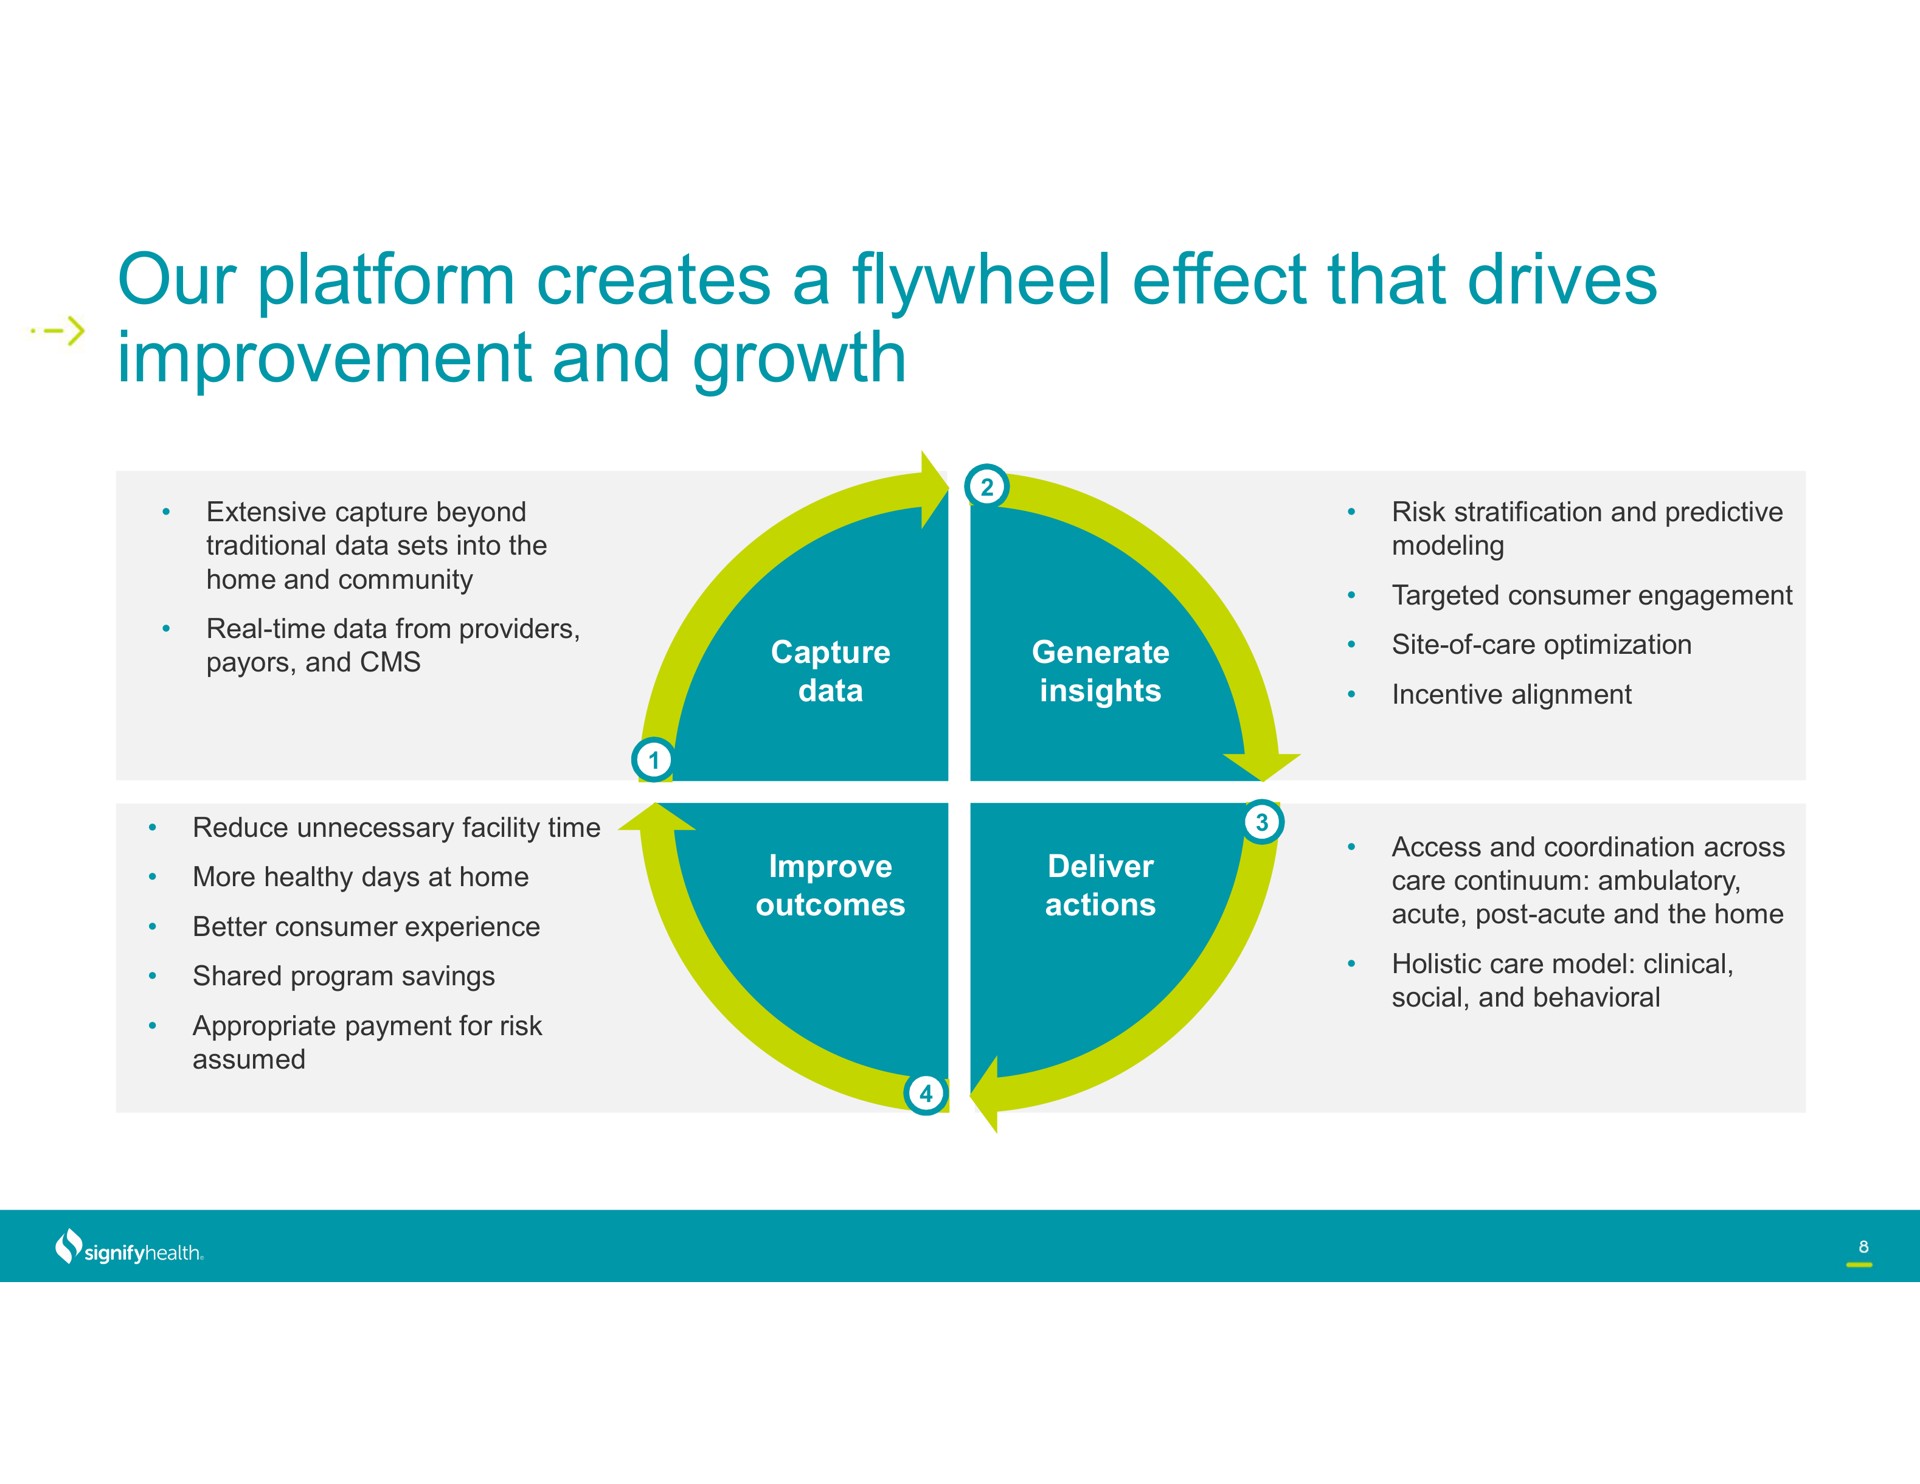 our platform creates a flywheel effect that drives improvement and growth | Signify Health